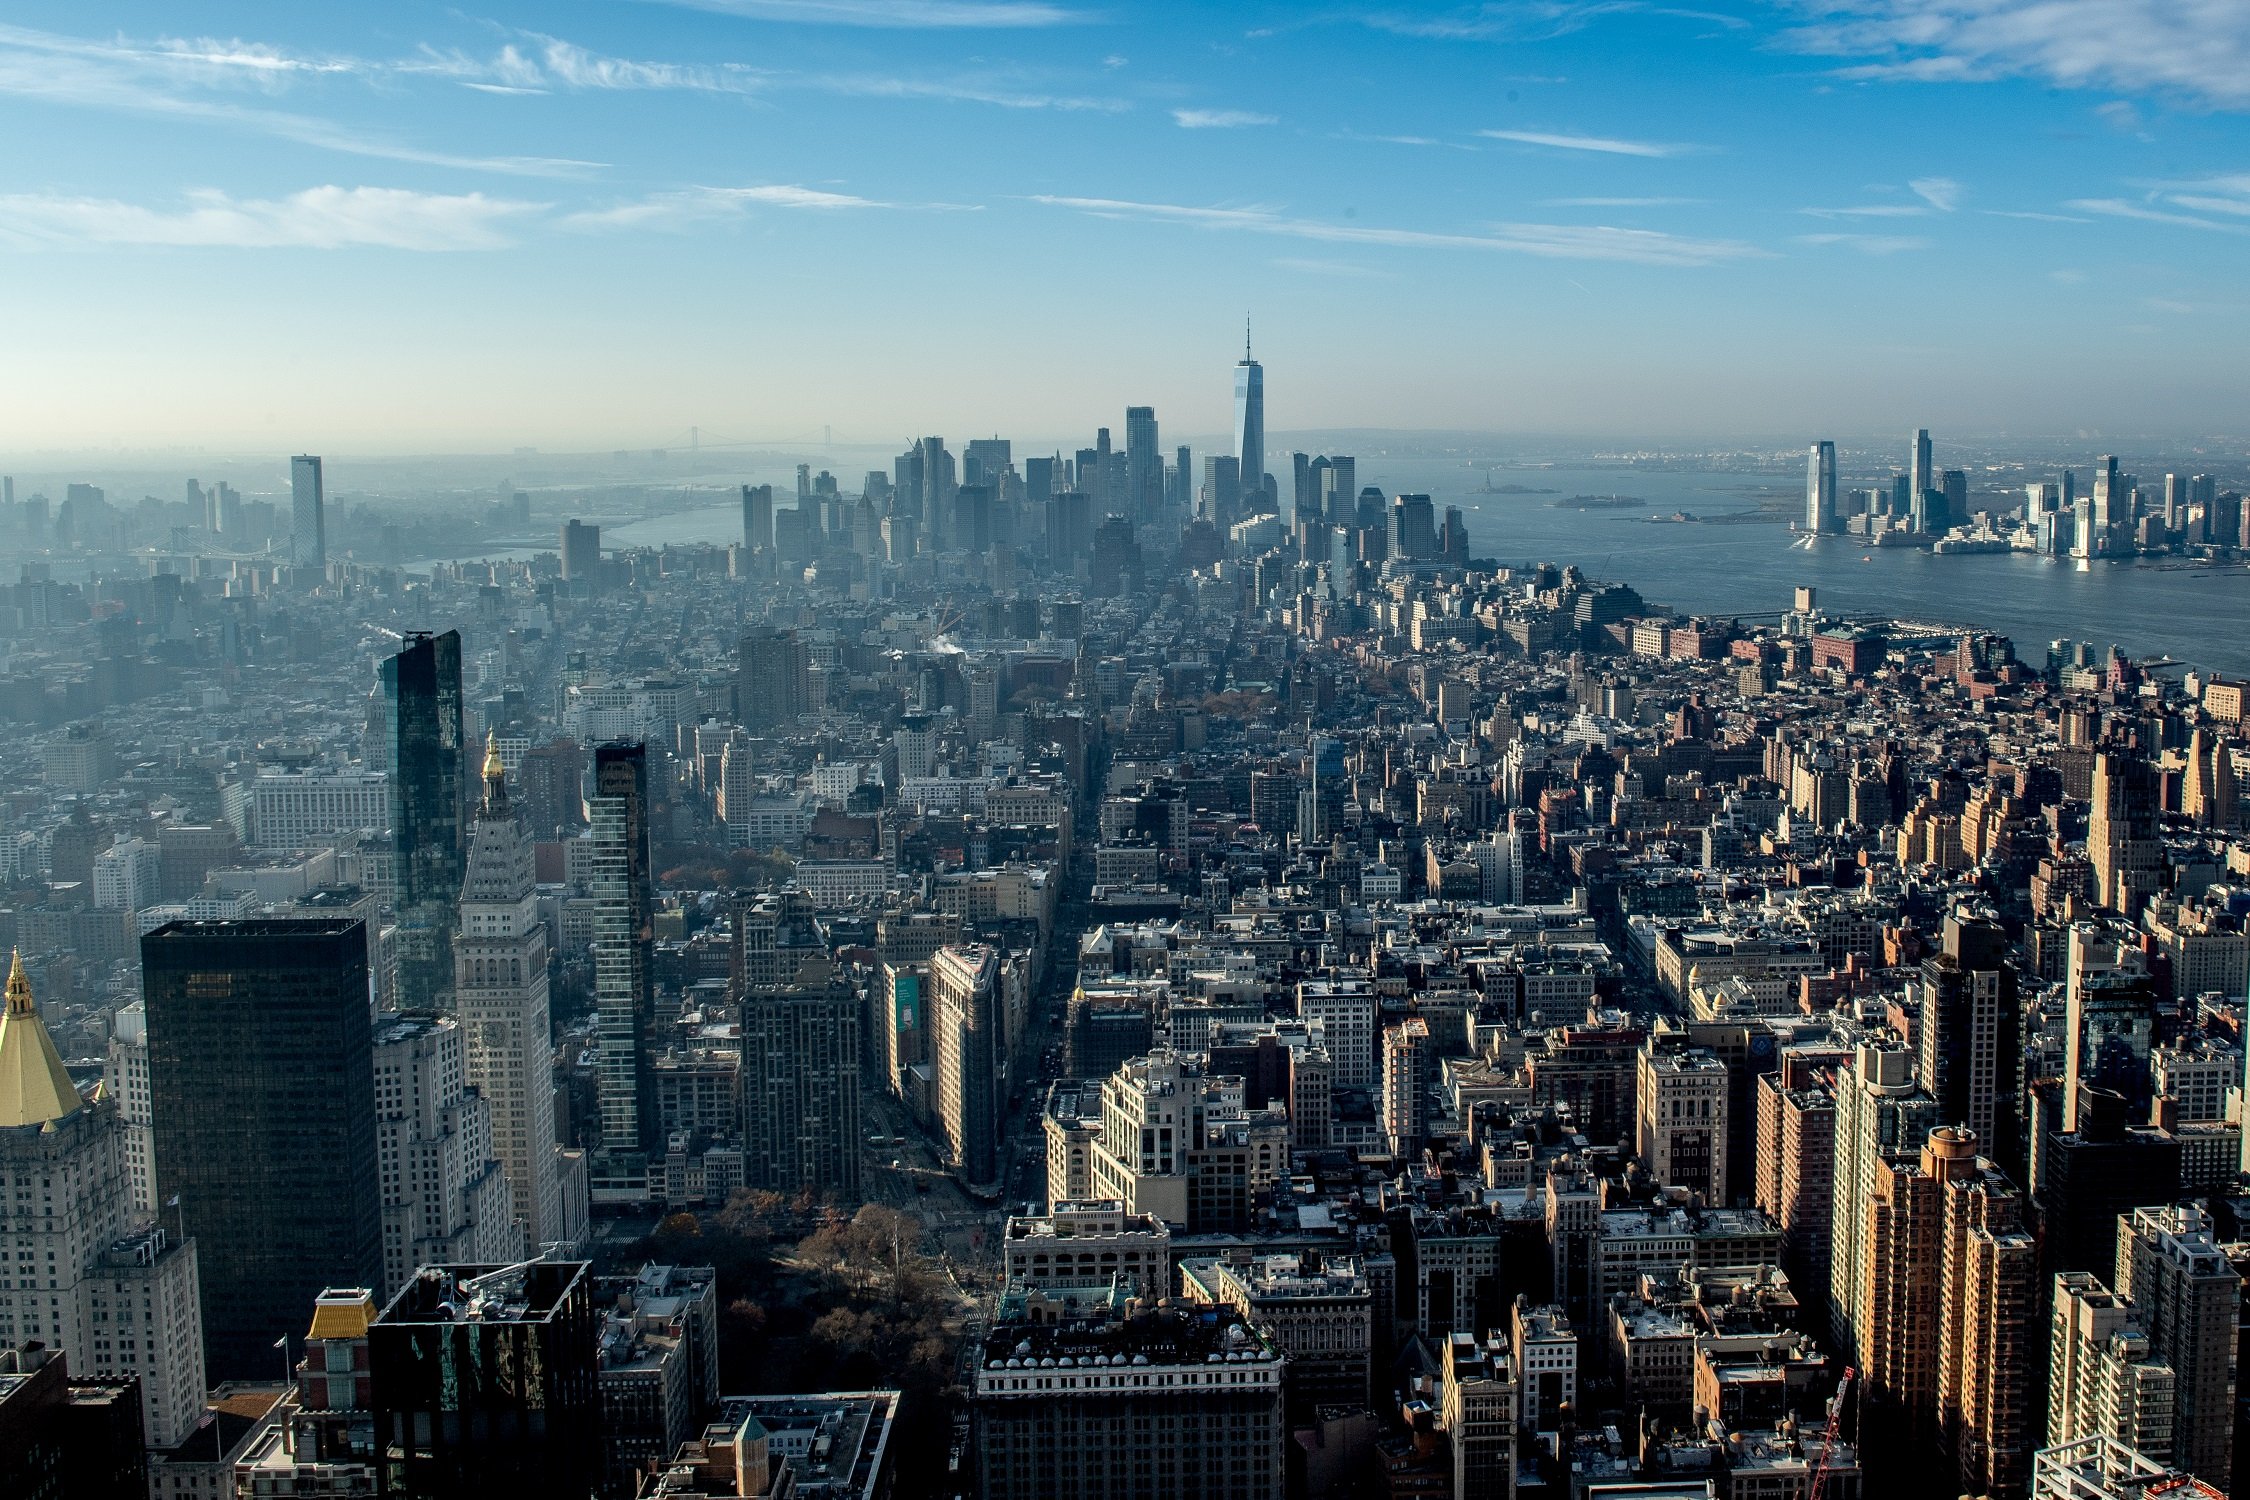 A view of the Manhattan skyline from the Empire State Building